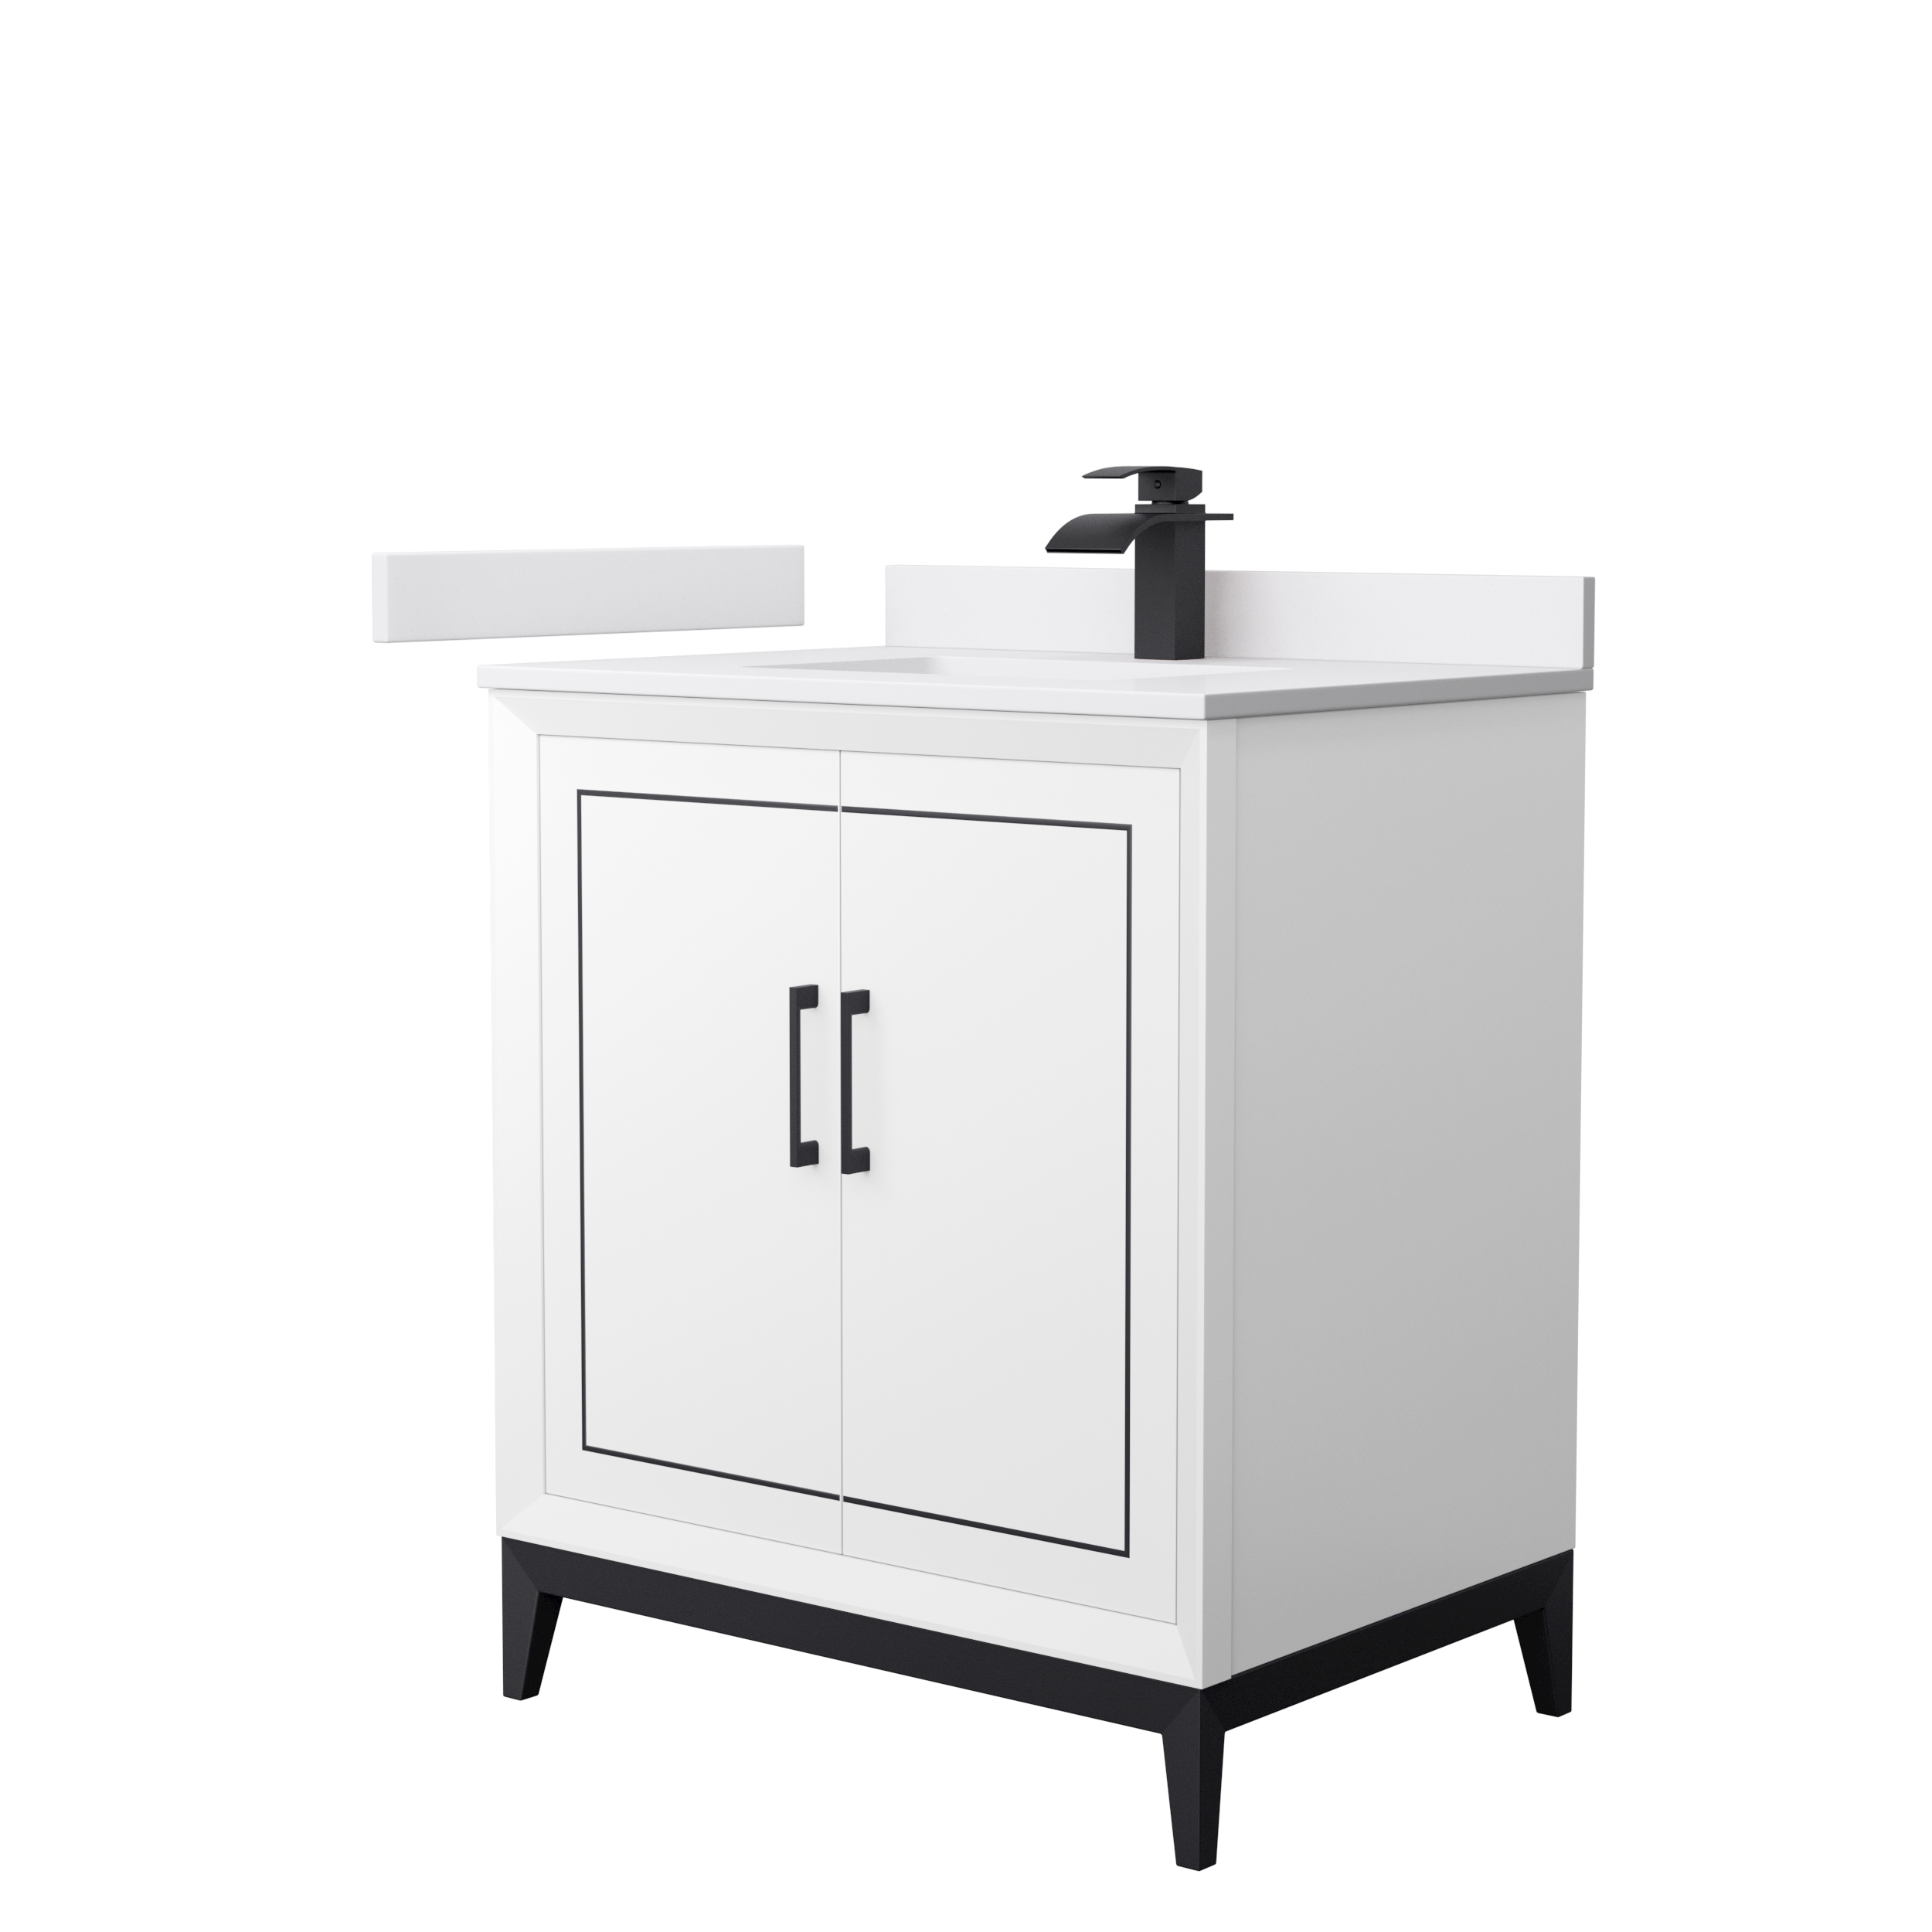 marlena 30" single vanity with optional cultured marble counter - white